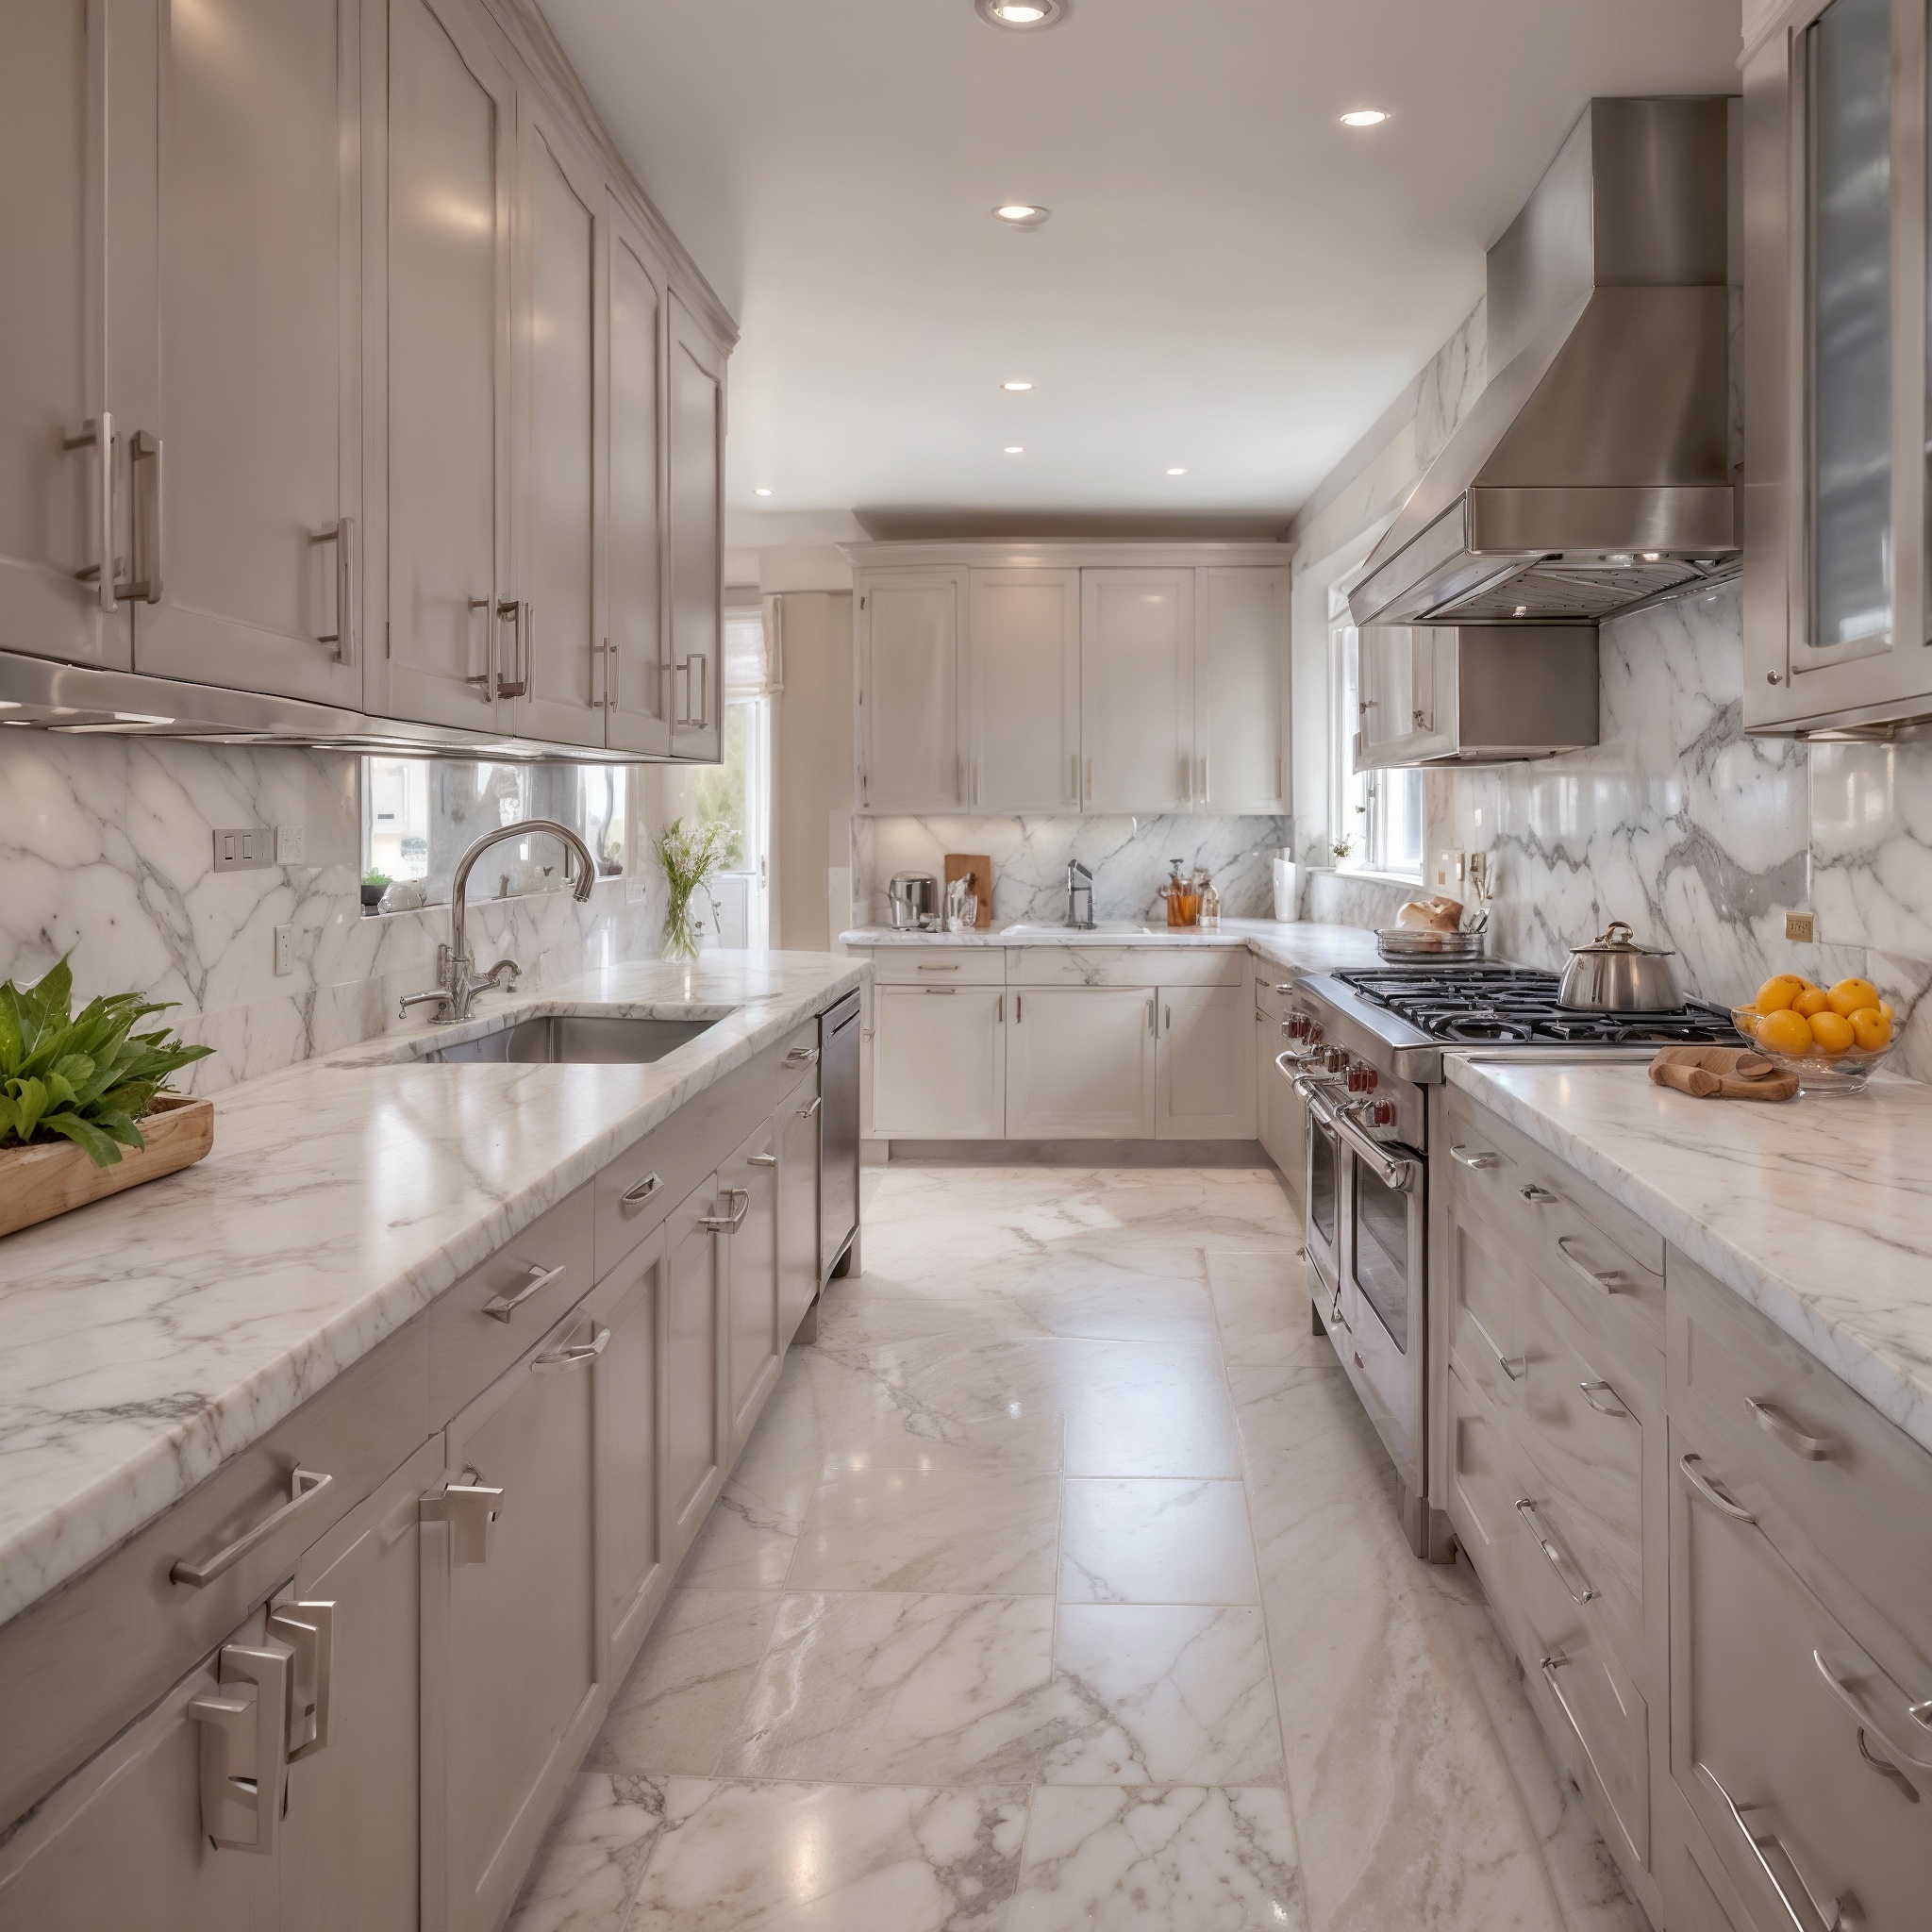 Luxury Galey Kitchen Layout With Custom Cabinetry, Marble Countertops, High-end Stainless Steel Appliances